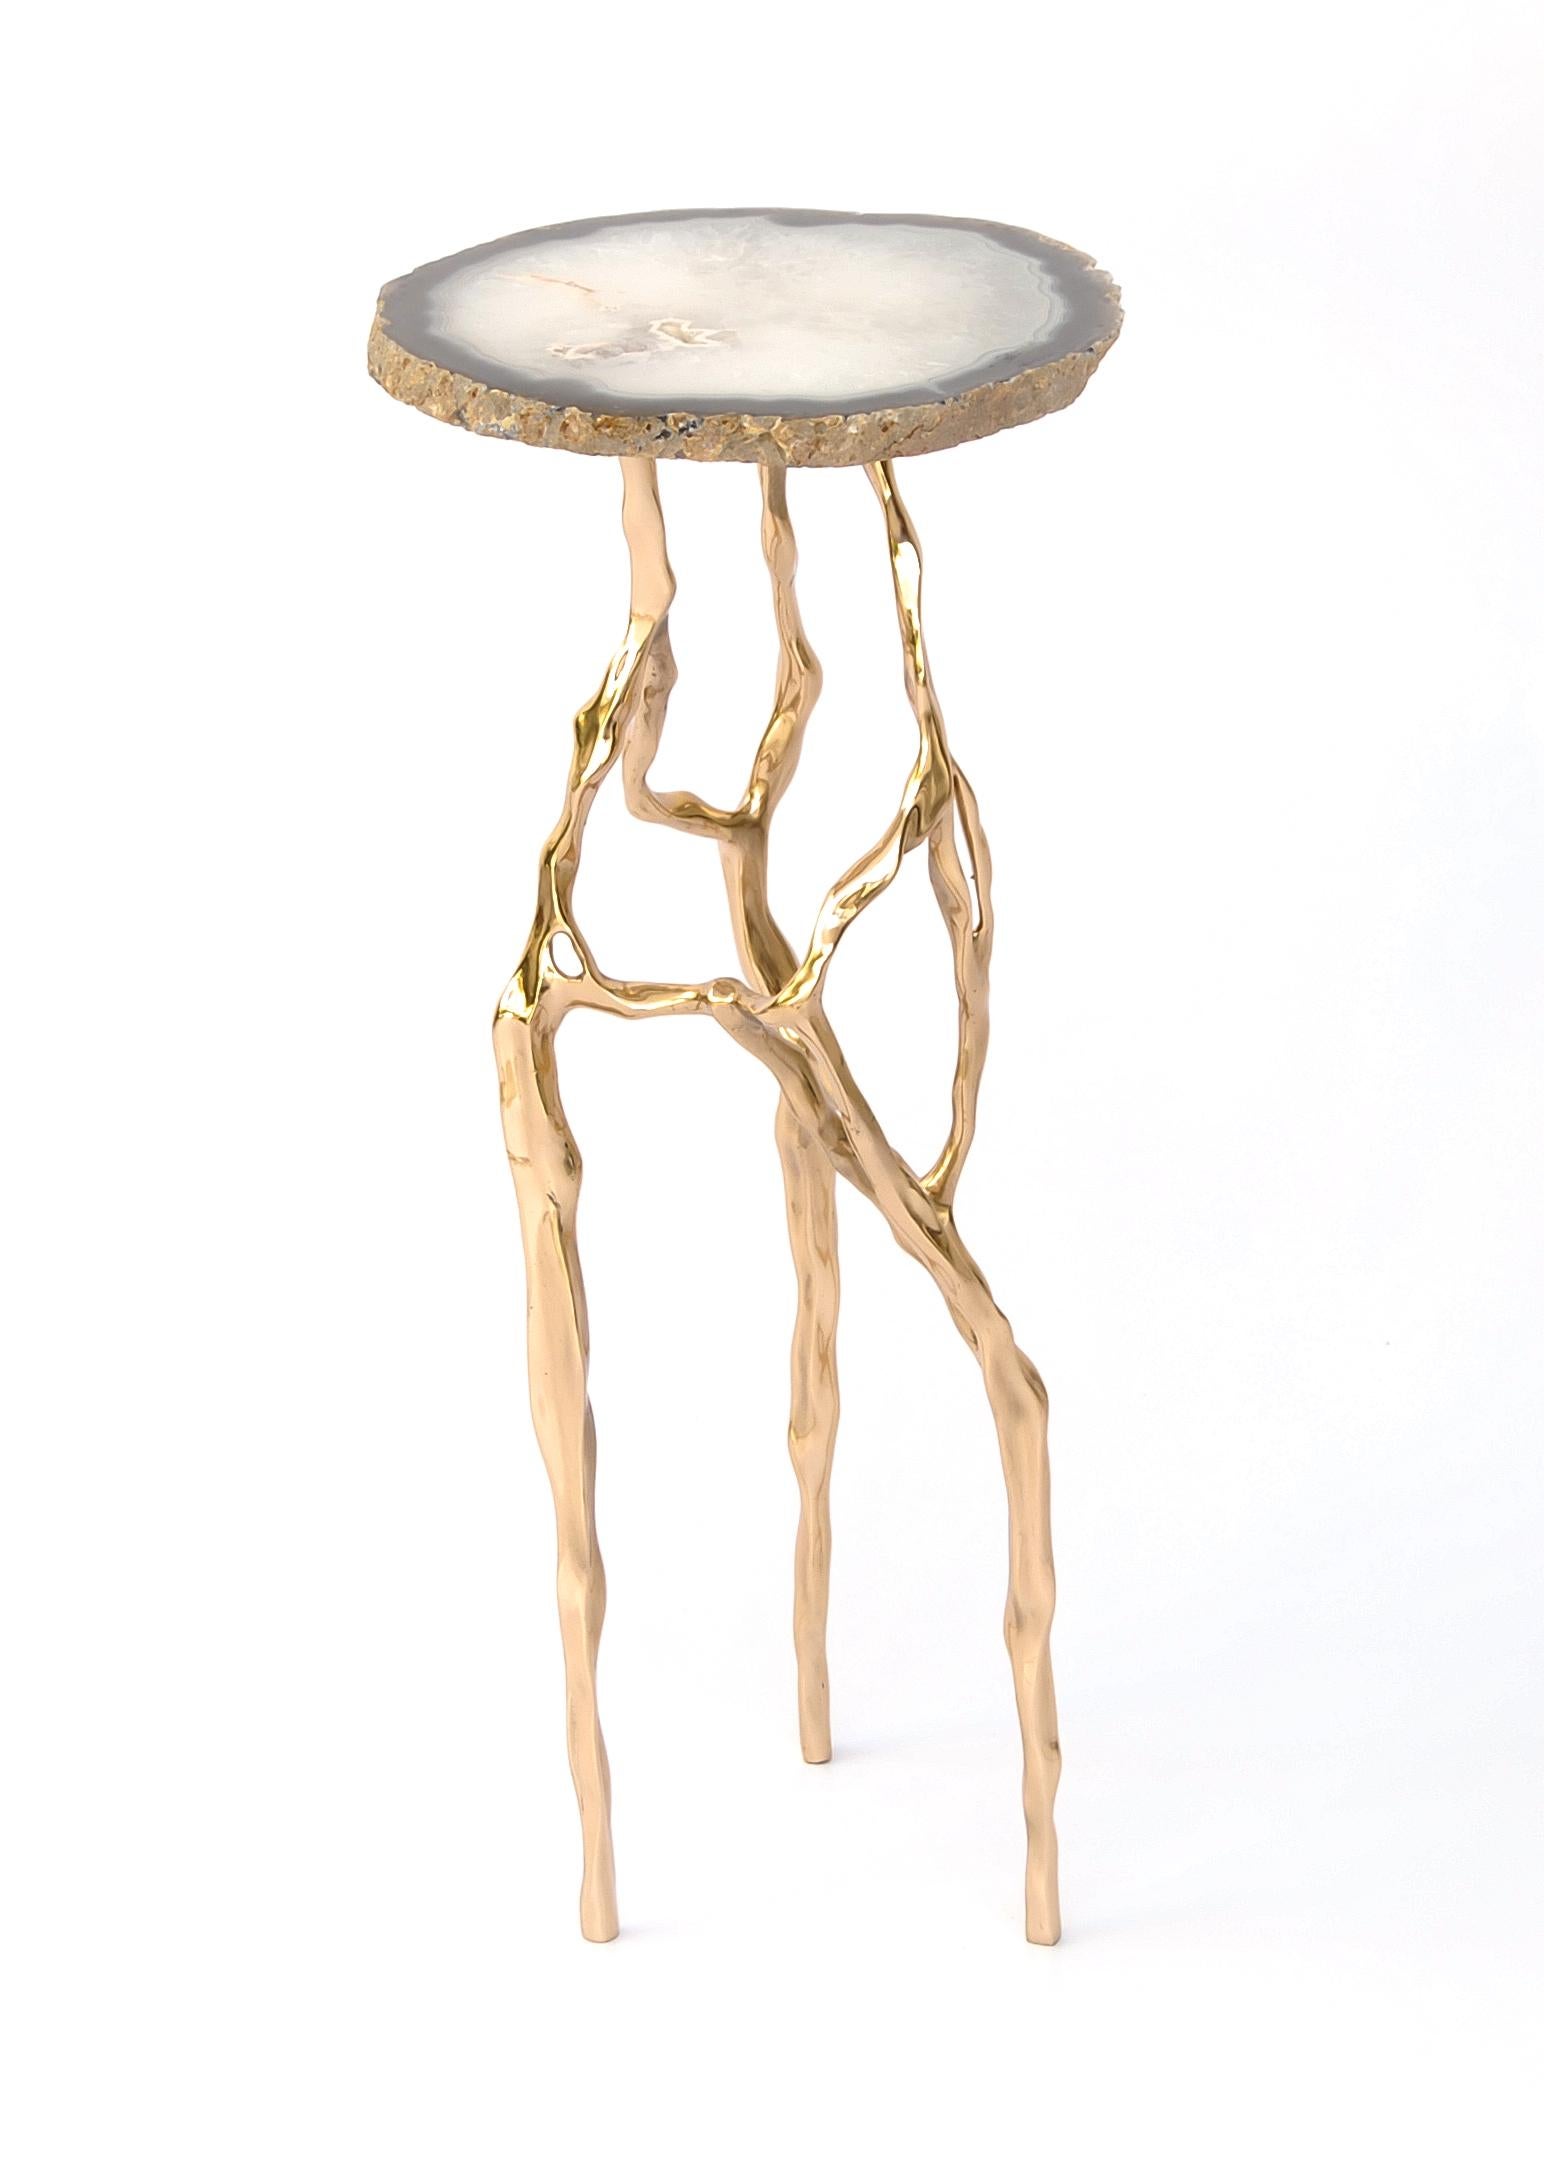 Brazilian Sid Drink Table with Agate Top by Fakasaka Design For Sale